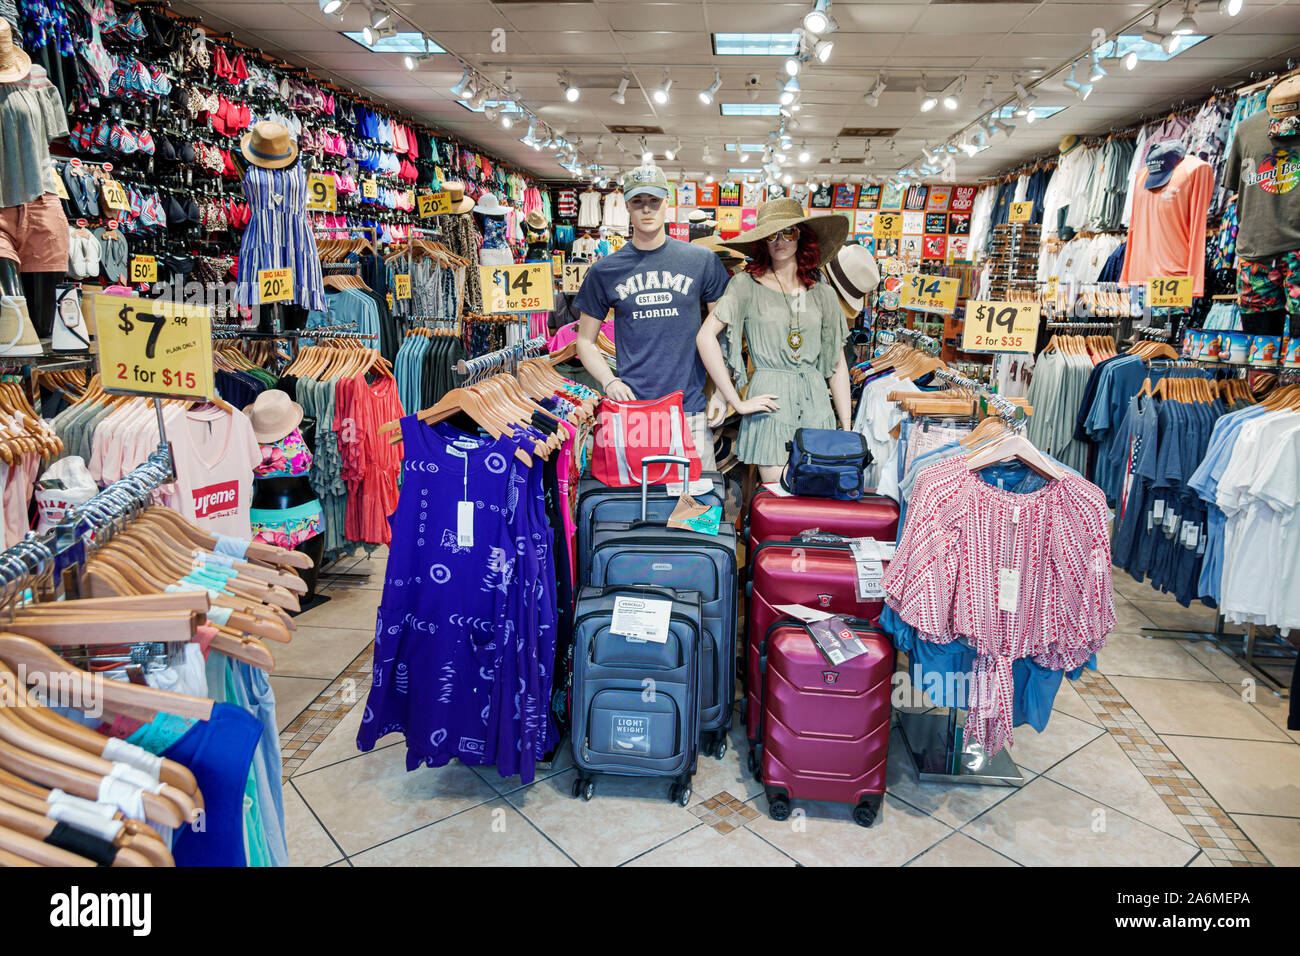 Miami Beach Florida,North Beach,store,shopping,beach-related goods,resortwear,clothes,luggage,budget sale price,FL190819004 Stock Photo